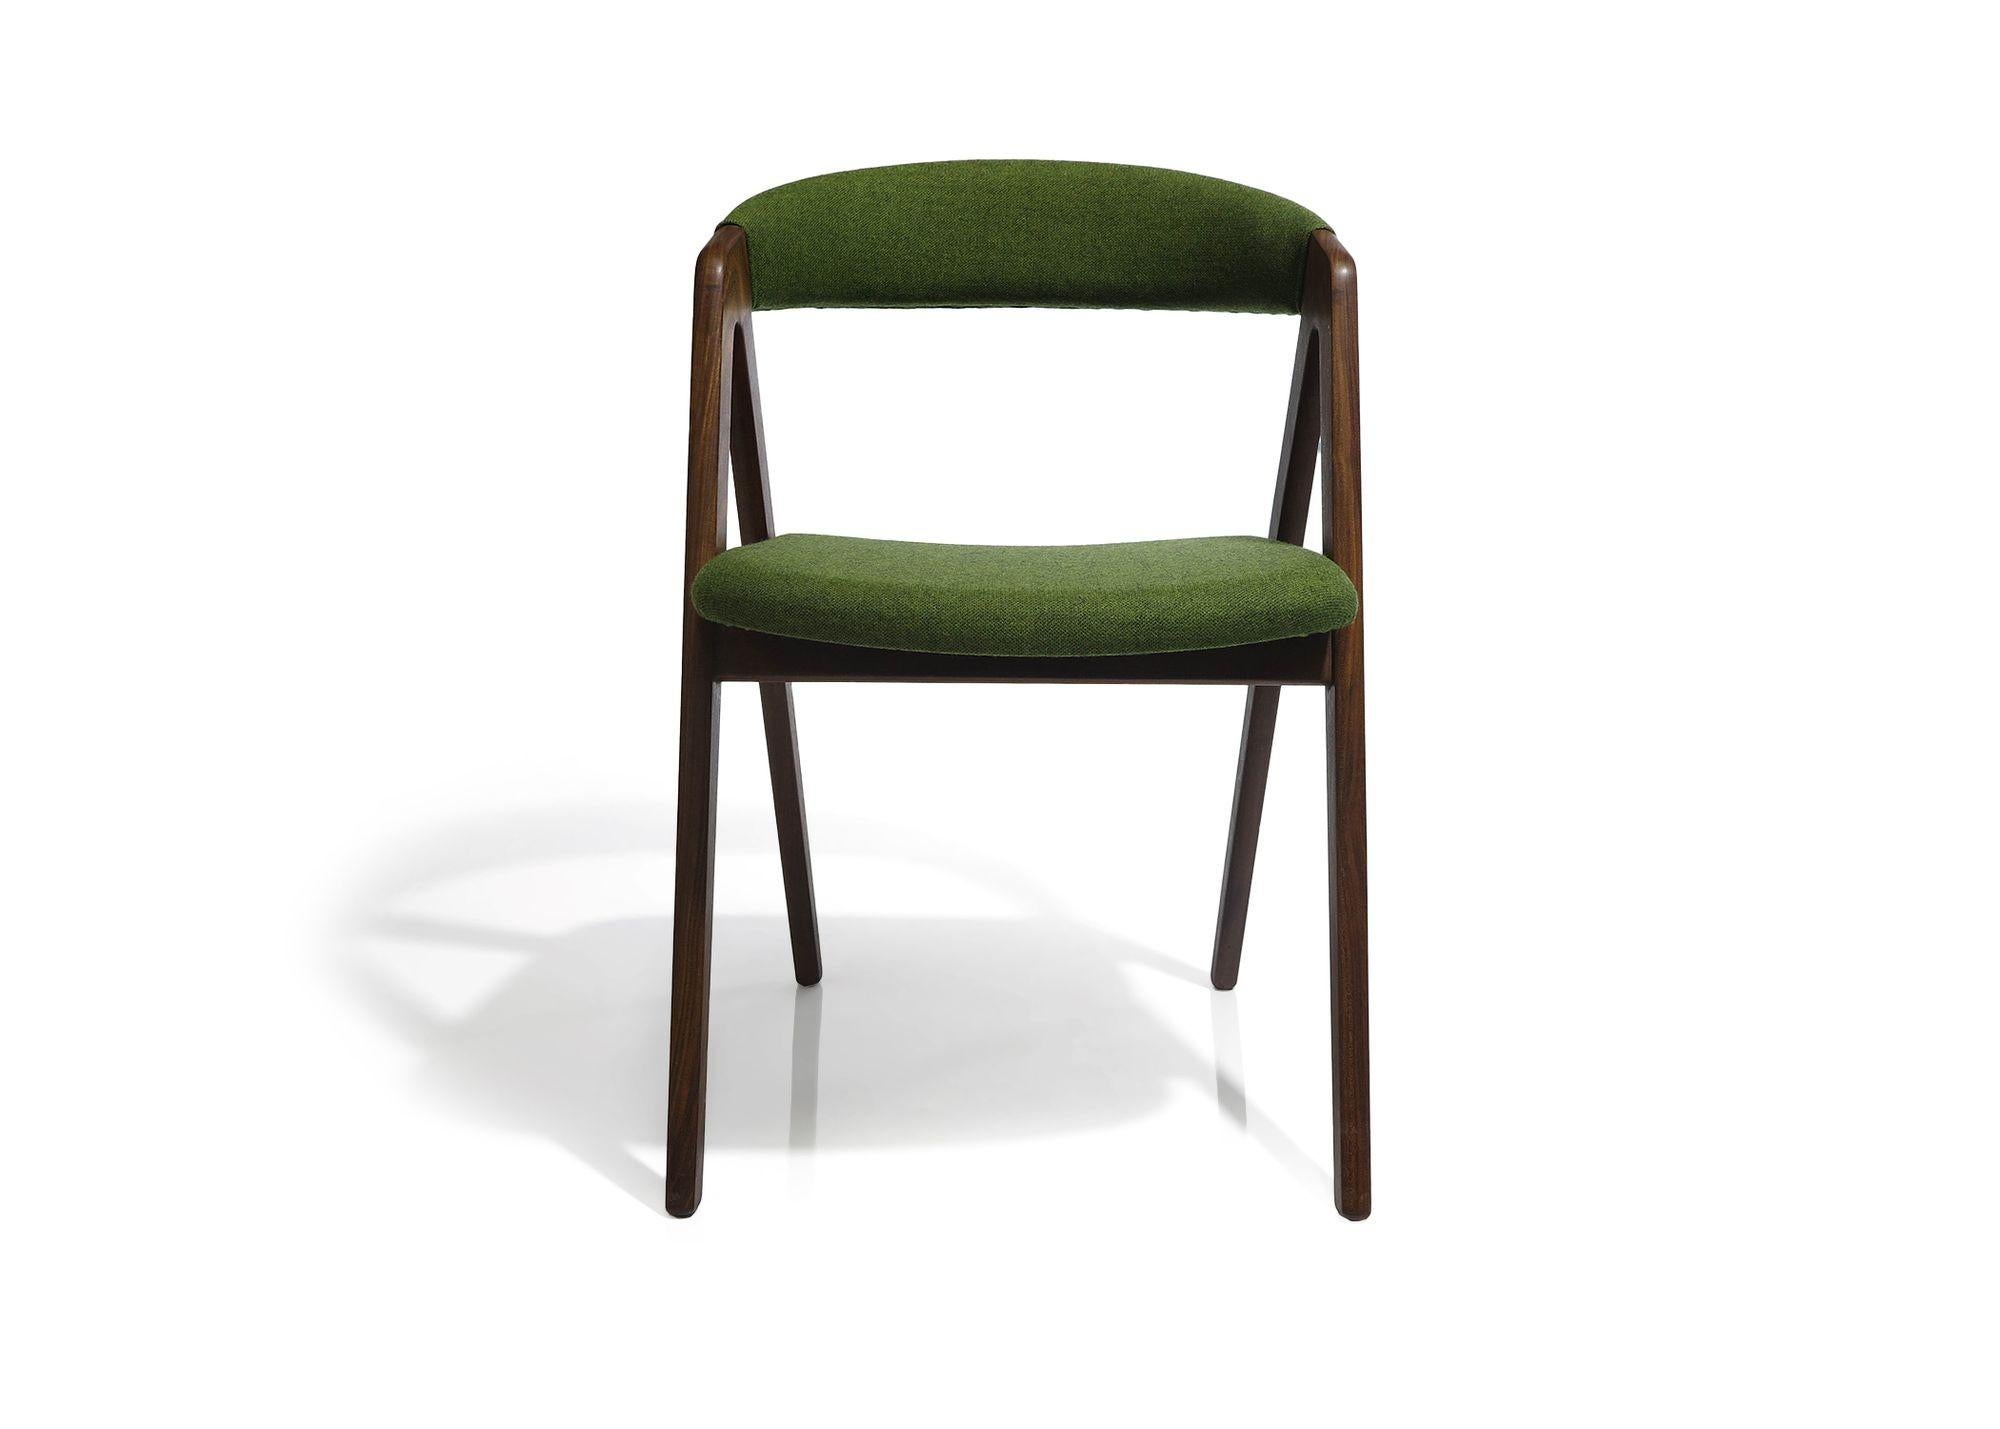 Solid walnut curved back dining chairs newly upholstered in an olive green wool fabric. Sturdy, dark walnut frames fully restored in a natural oil. Comfortable curved backrests. Professionally restored and in excellent condition.  Additional chairs